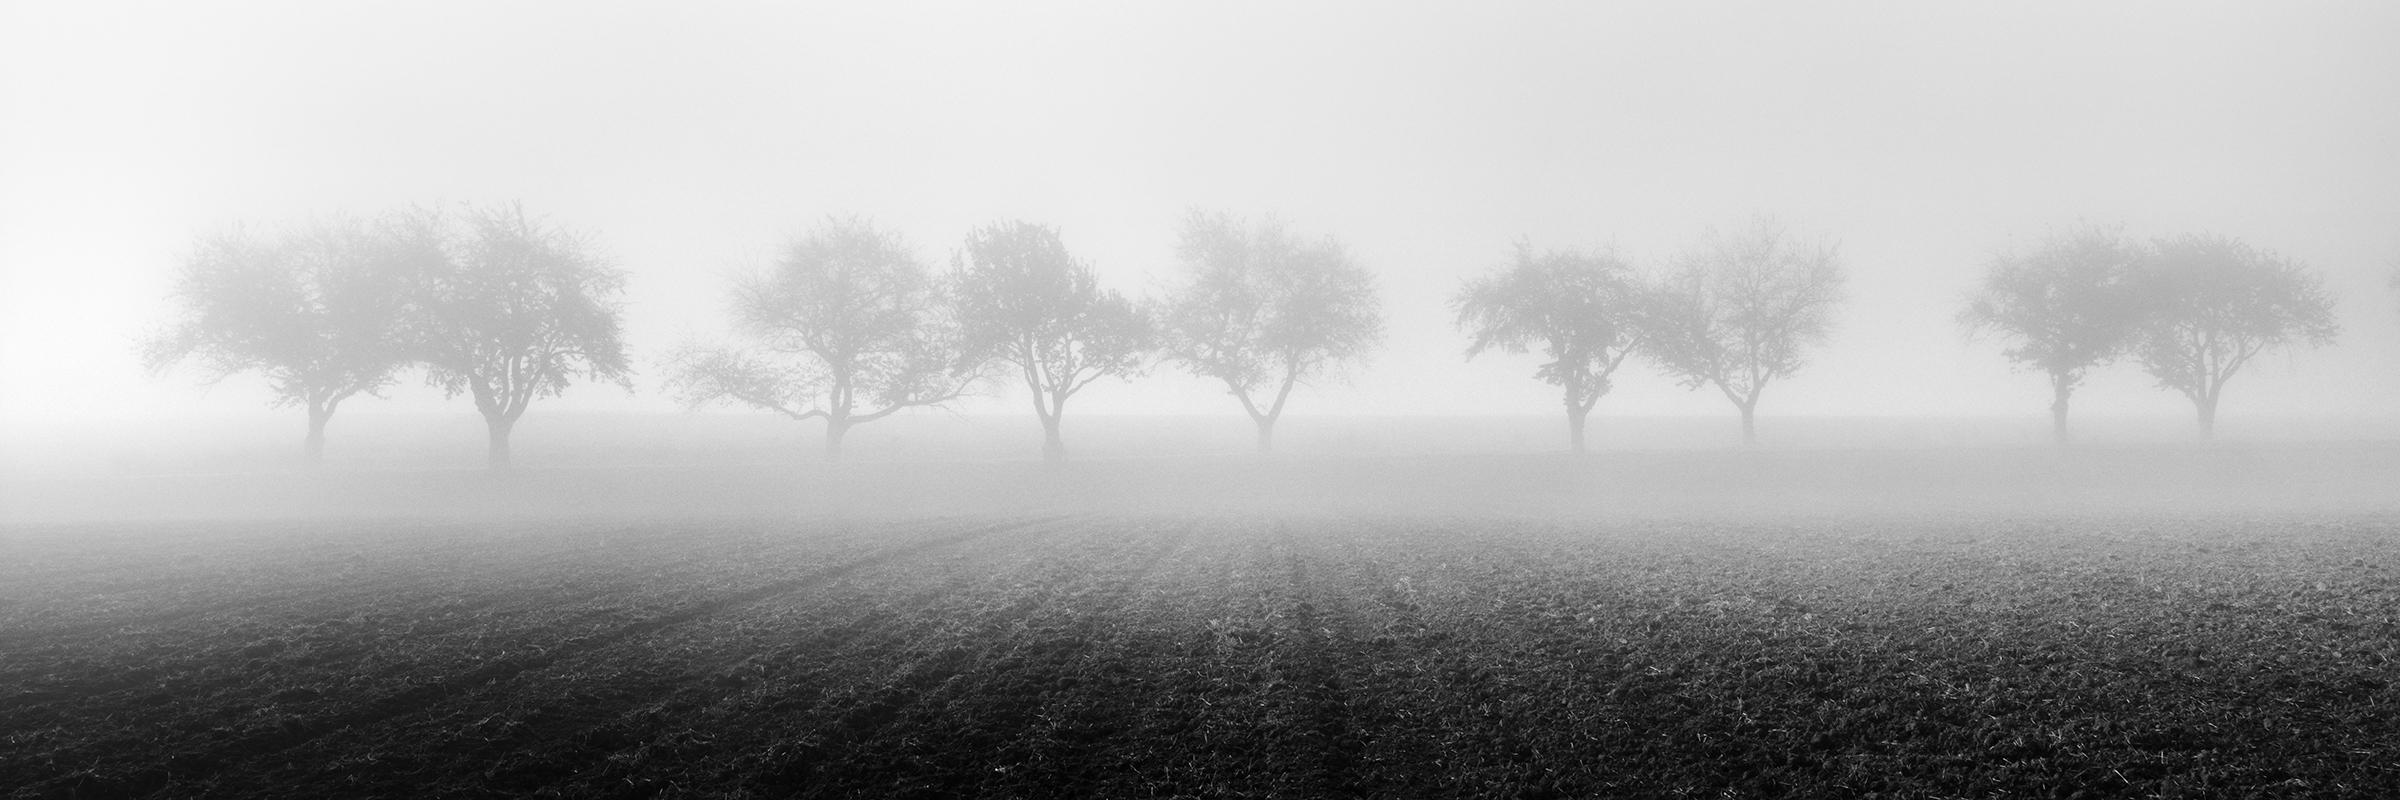 Foggy Morning, row of Cherry Trees, black and white photography, art landscape